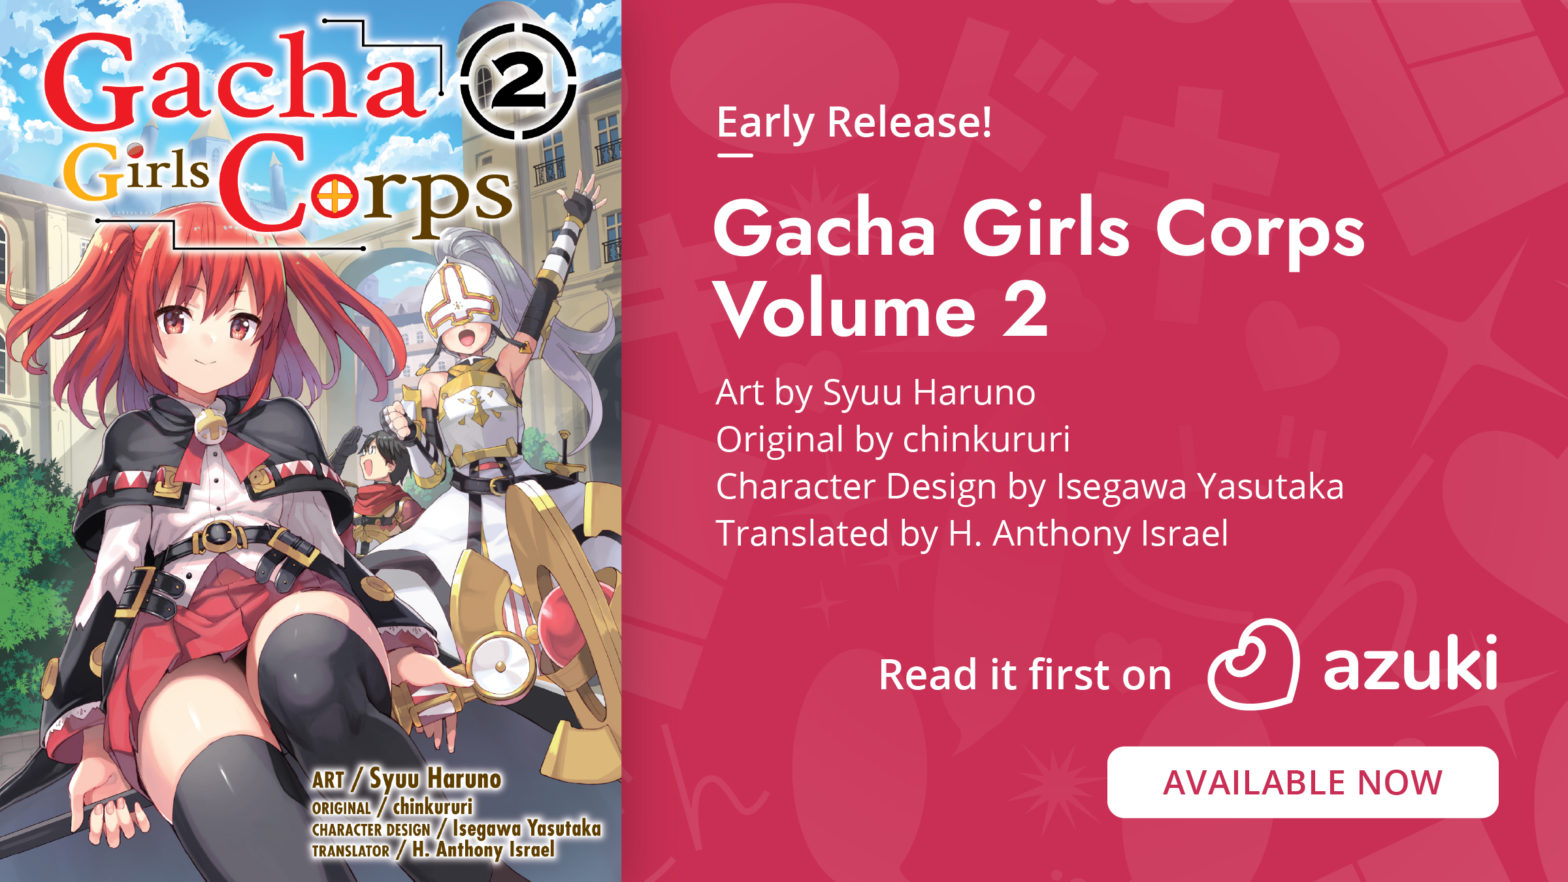 Early Release Gacha Girls Corps Volume 2. Read it first on Azuki. Available Now.